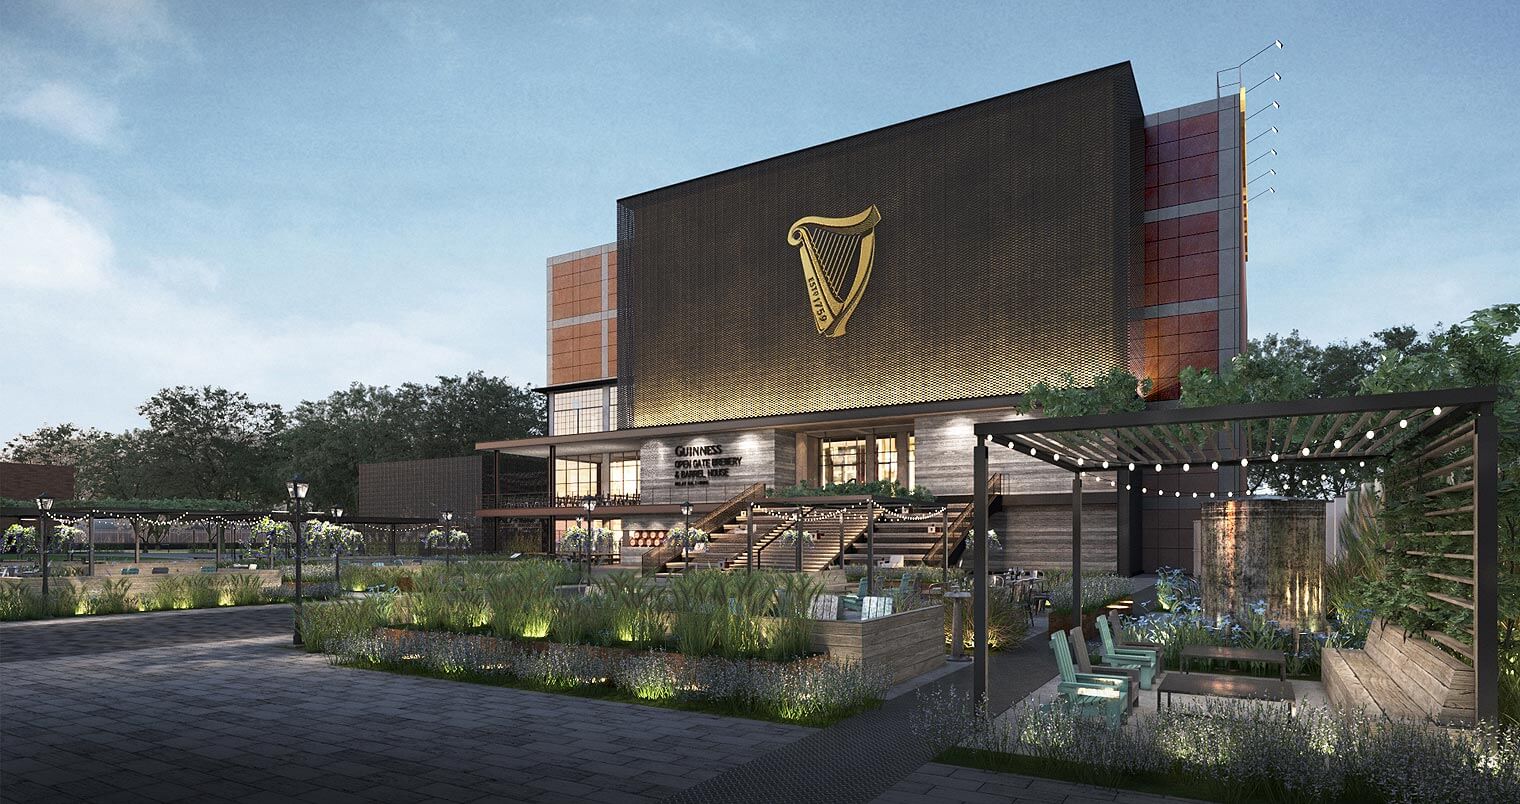 Guinness Open Gate Brewery & Barrel House, featured image